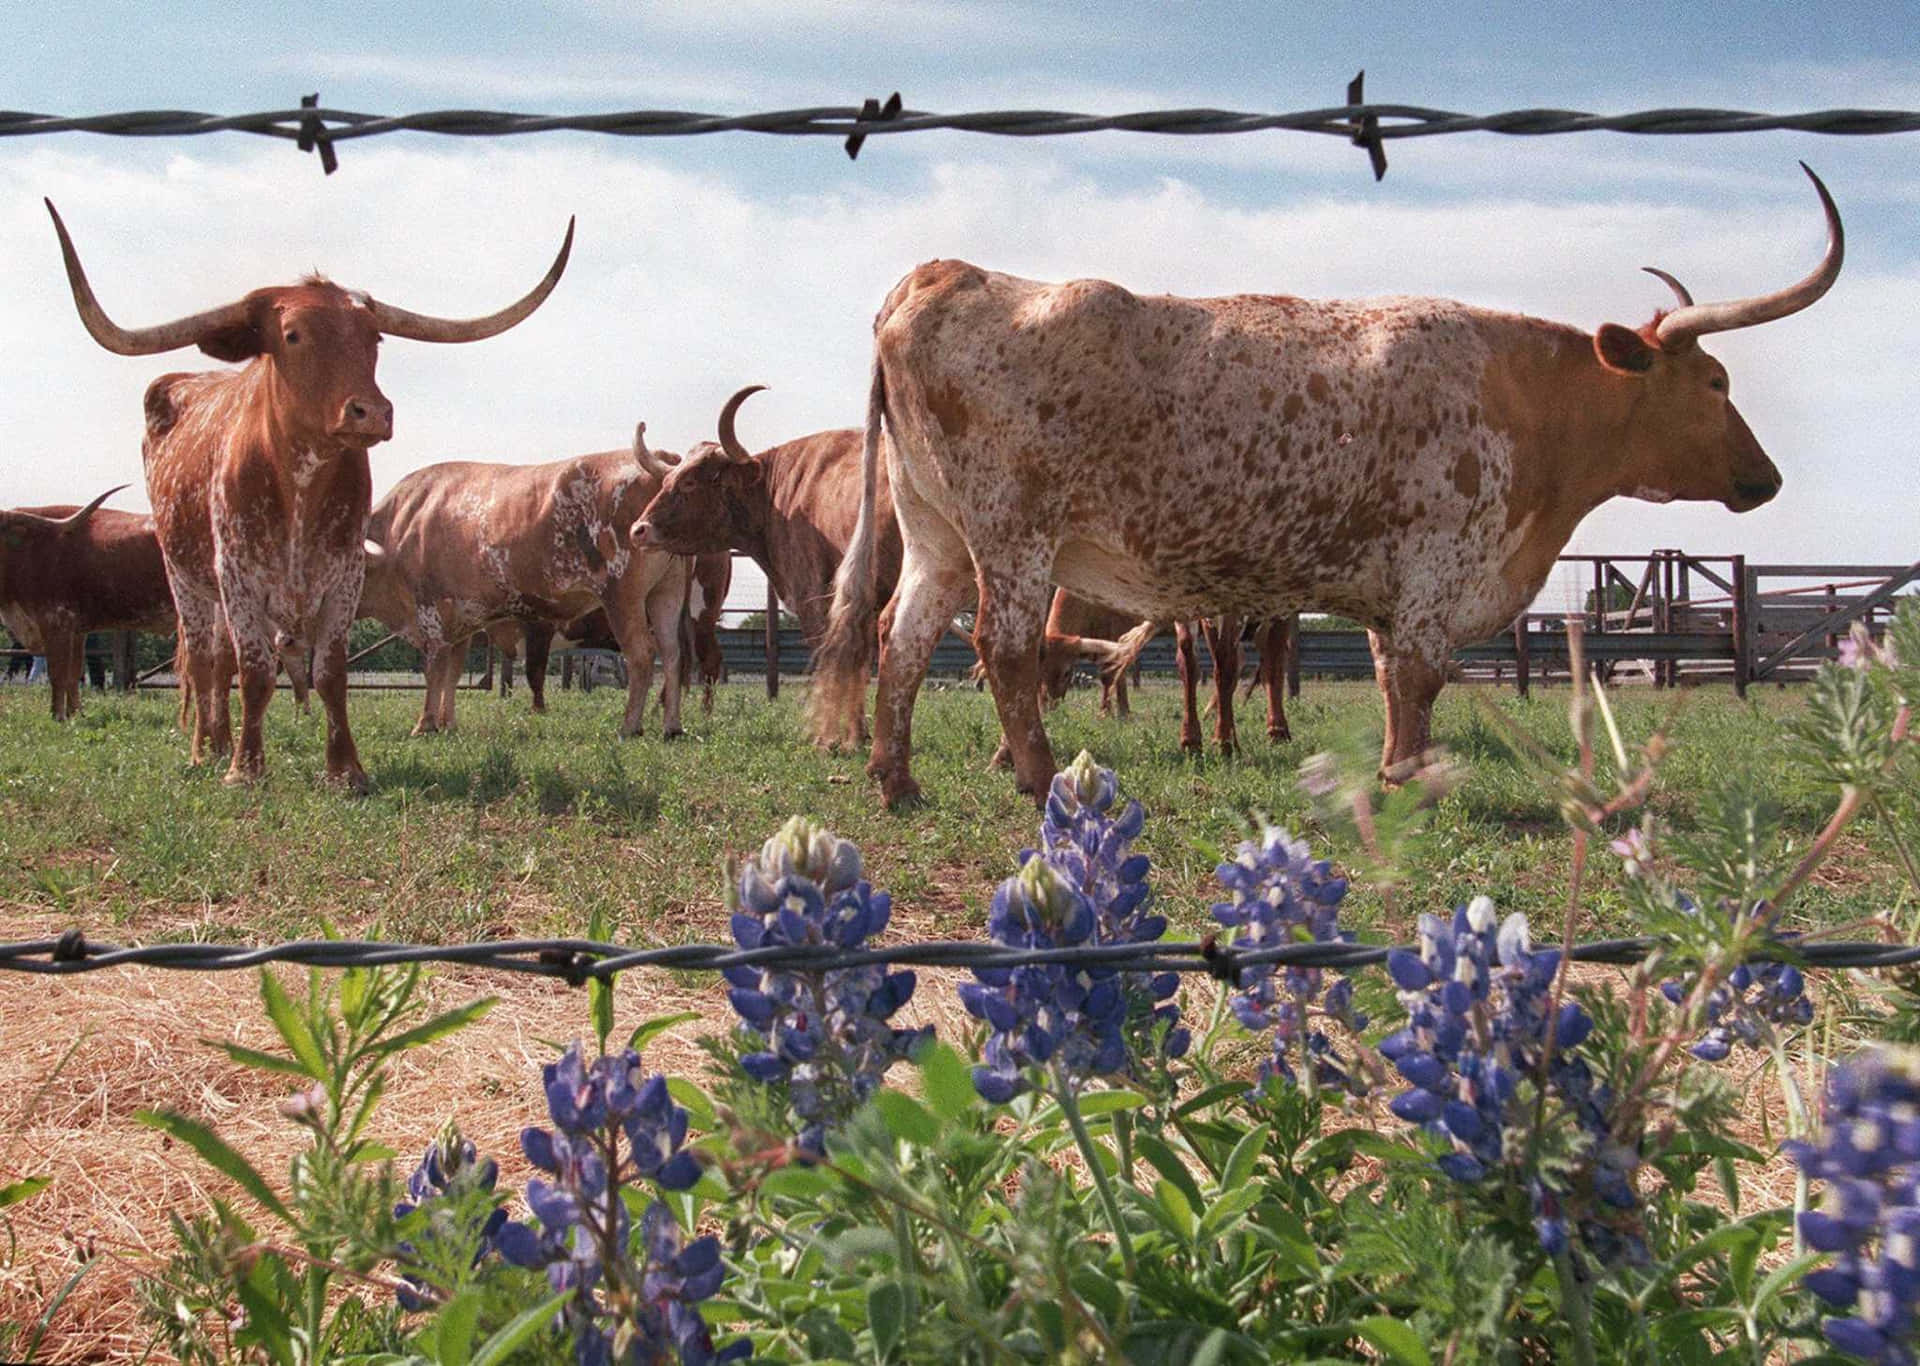 A Beautiful View of the Texas Longhorn